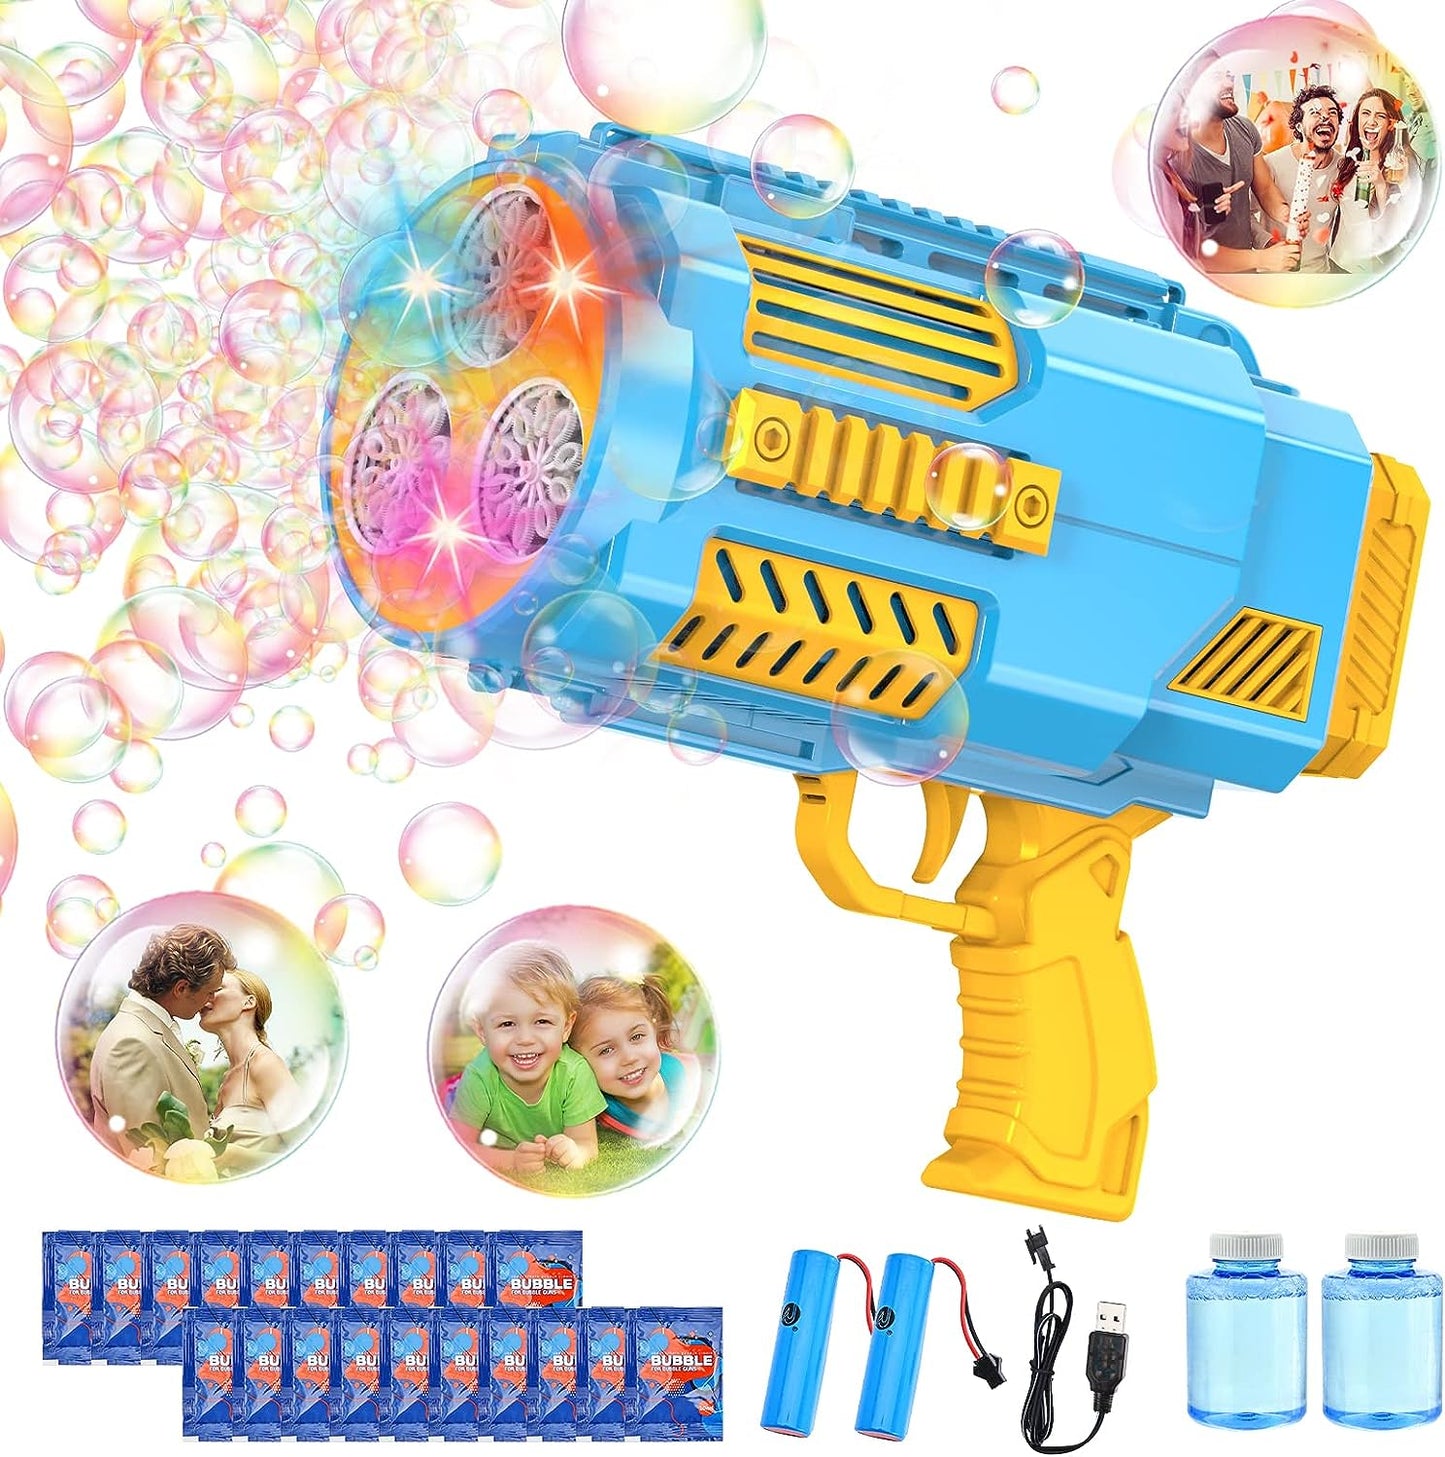 Bubble Machine Automatic Bubble Gun for Kids，Rocket Launcher Bubble Maker Blower,Auto Filling, 8000+ Bubbles Per Minute Bubble Toys for Boys Girls Adults Outdoor Indoor Birthday Wedding Party (Pink)